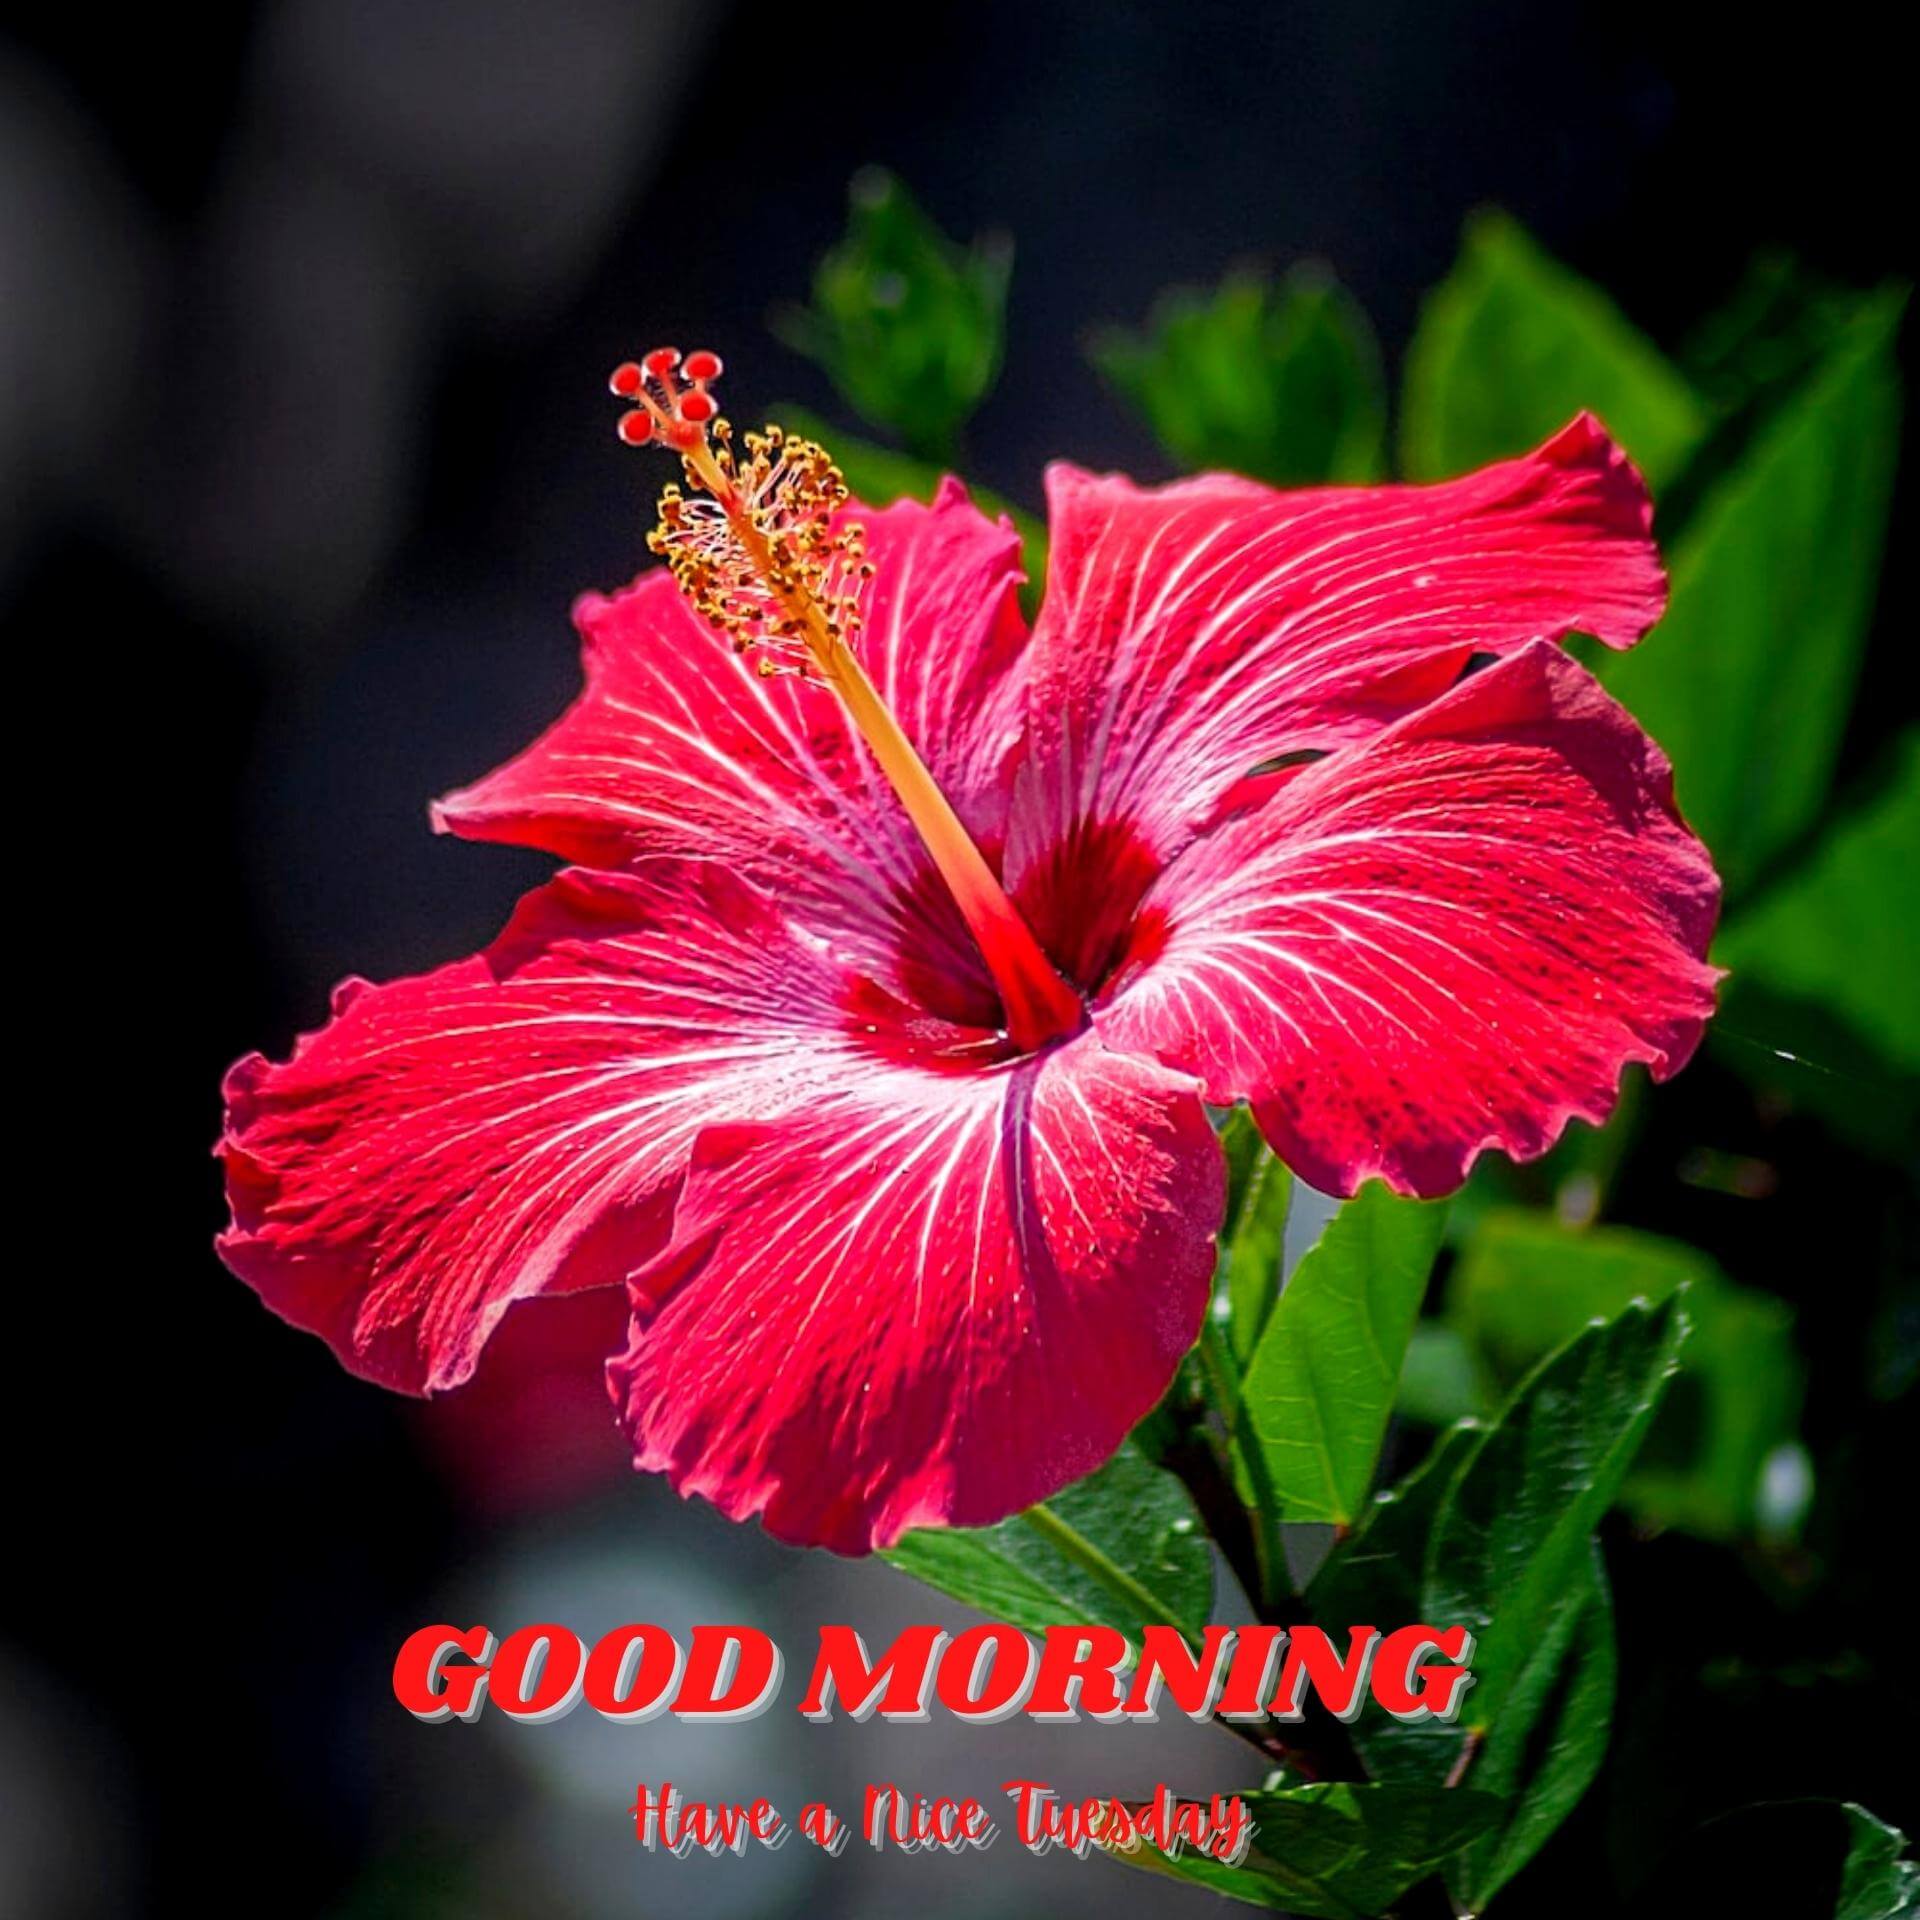 Tuesday good morning Pics With Flower